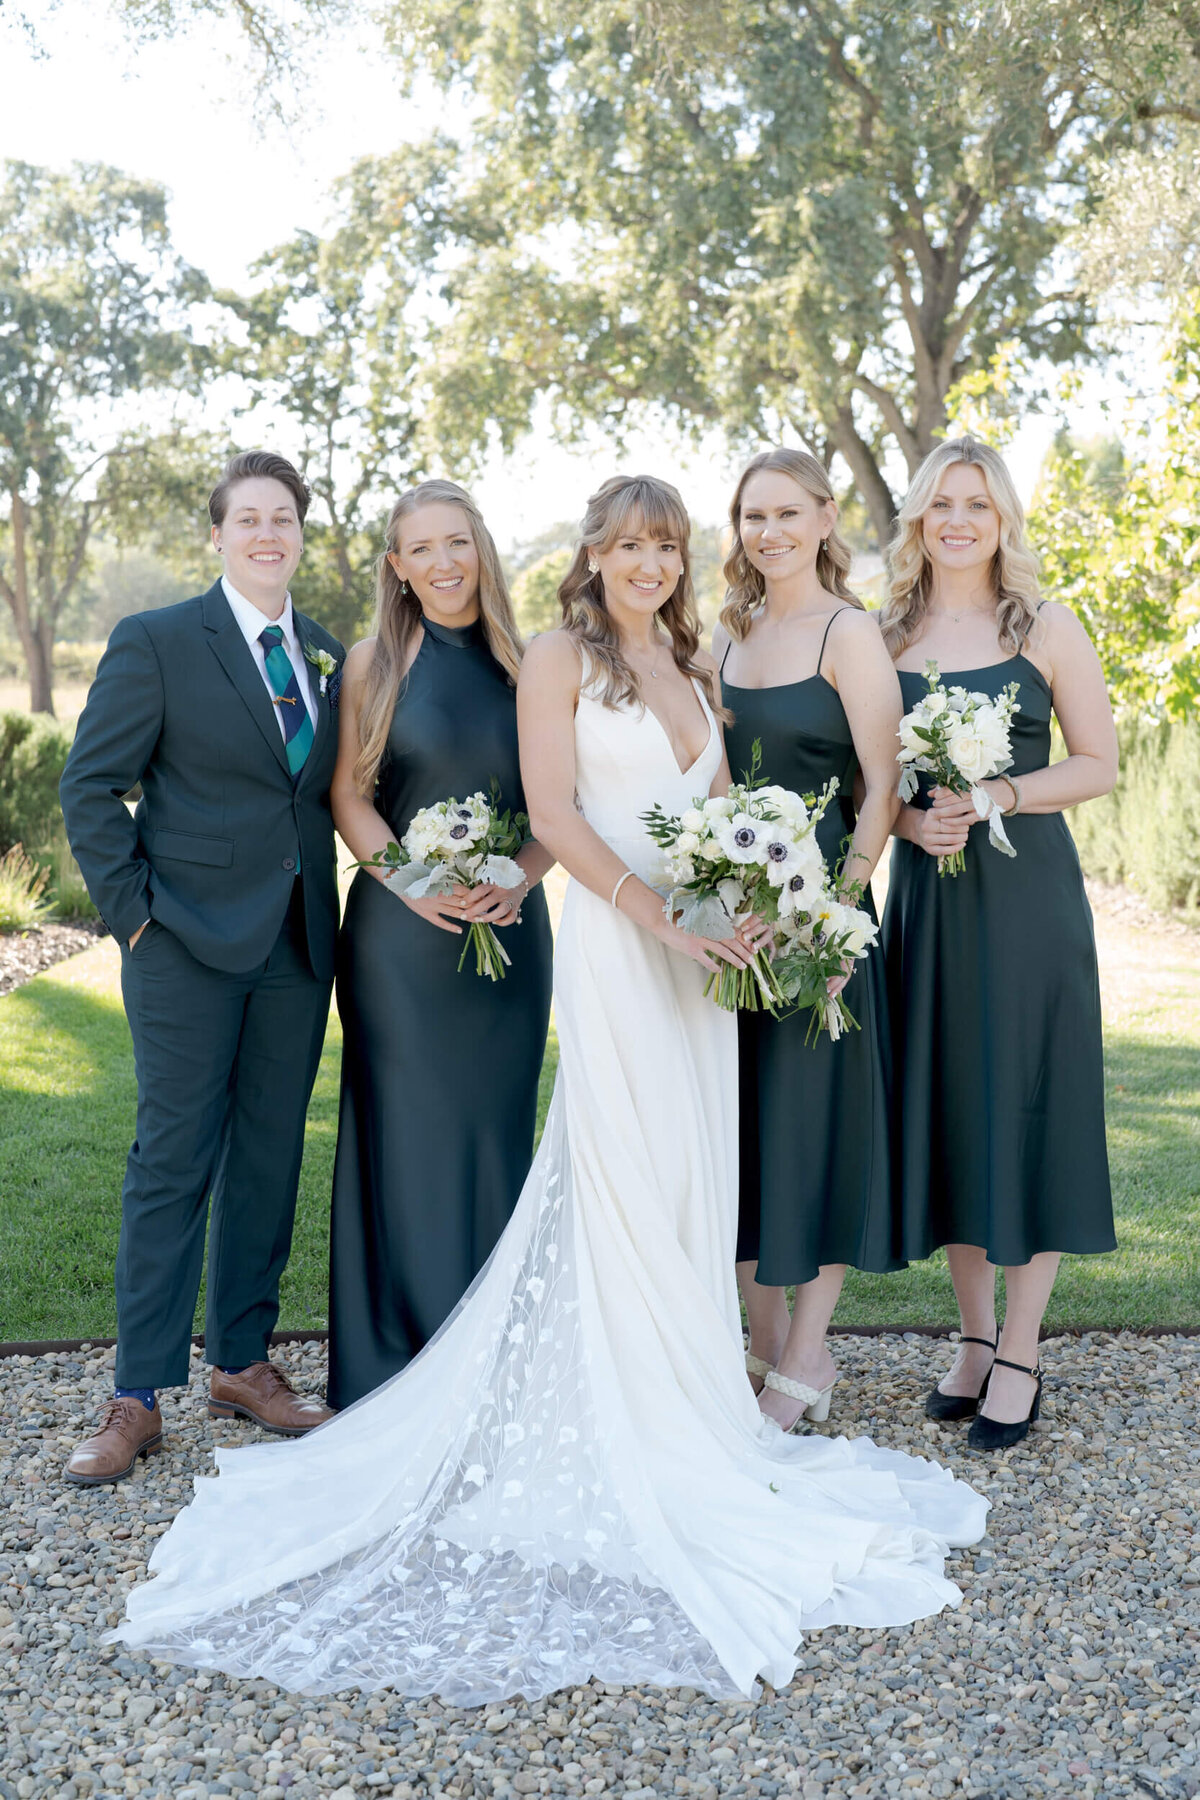 Lovely bride in white gown poses with her family and bridesmaids dressed elegantly in black.